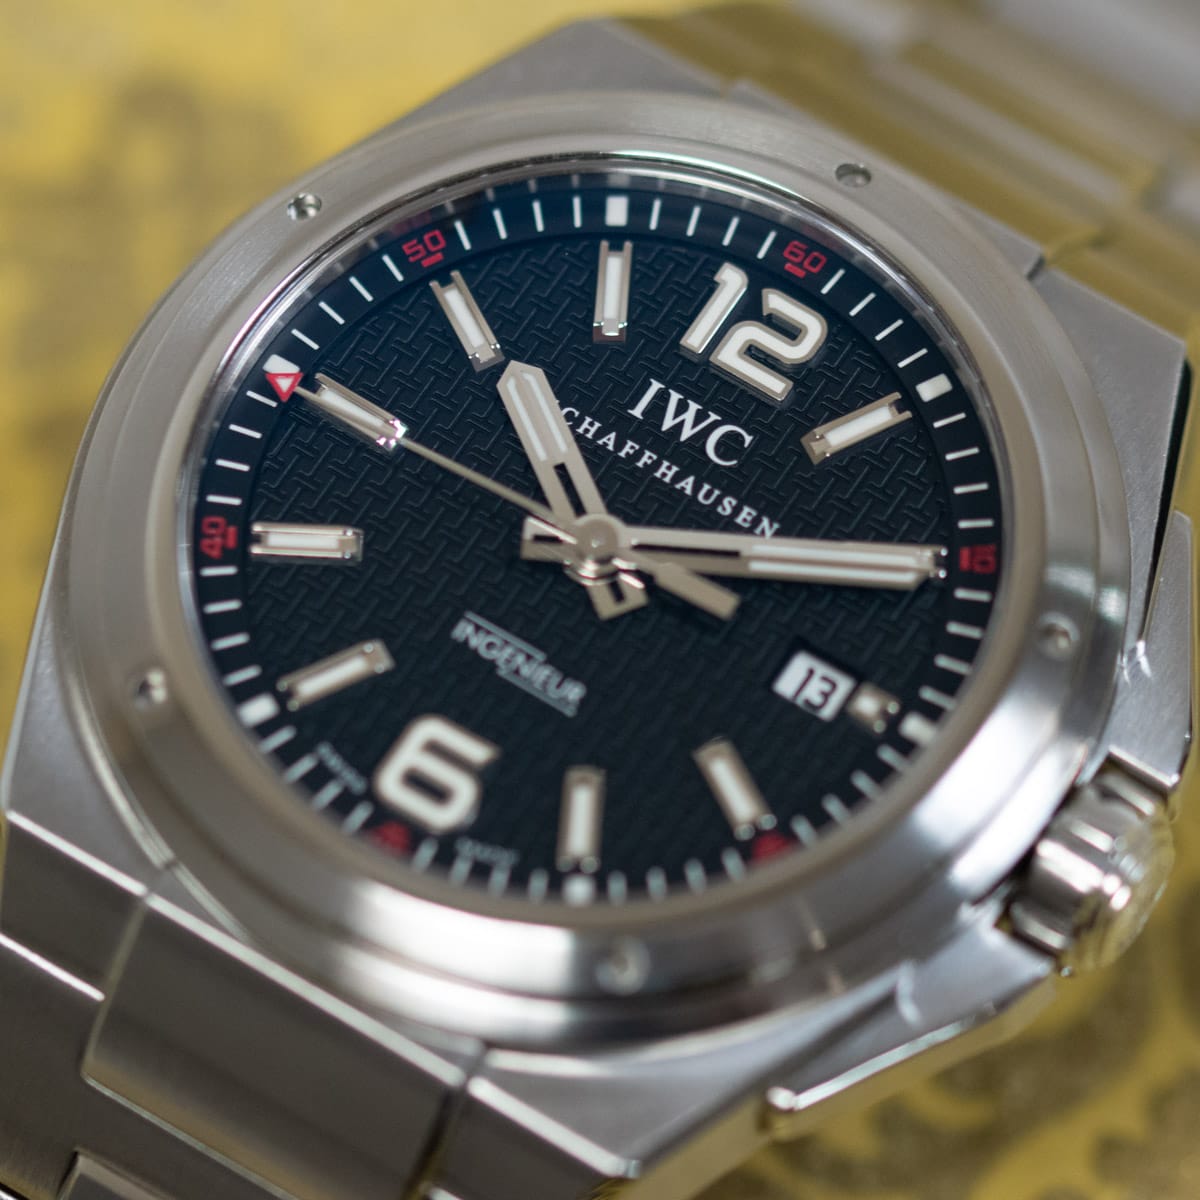 Extra Shot of Ingenieur Mission Earth